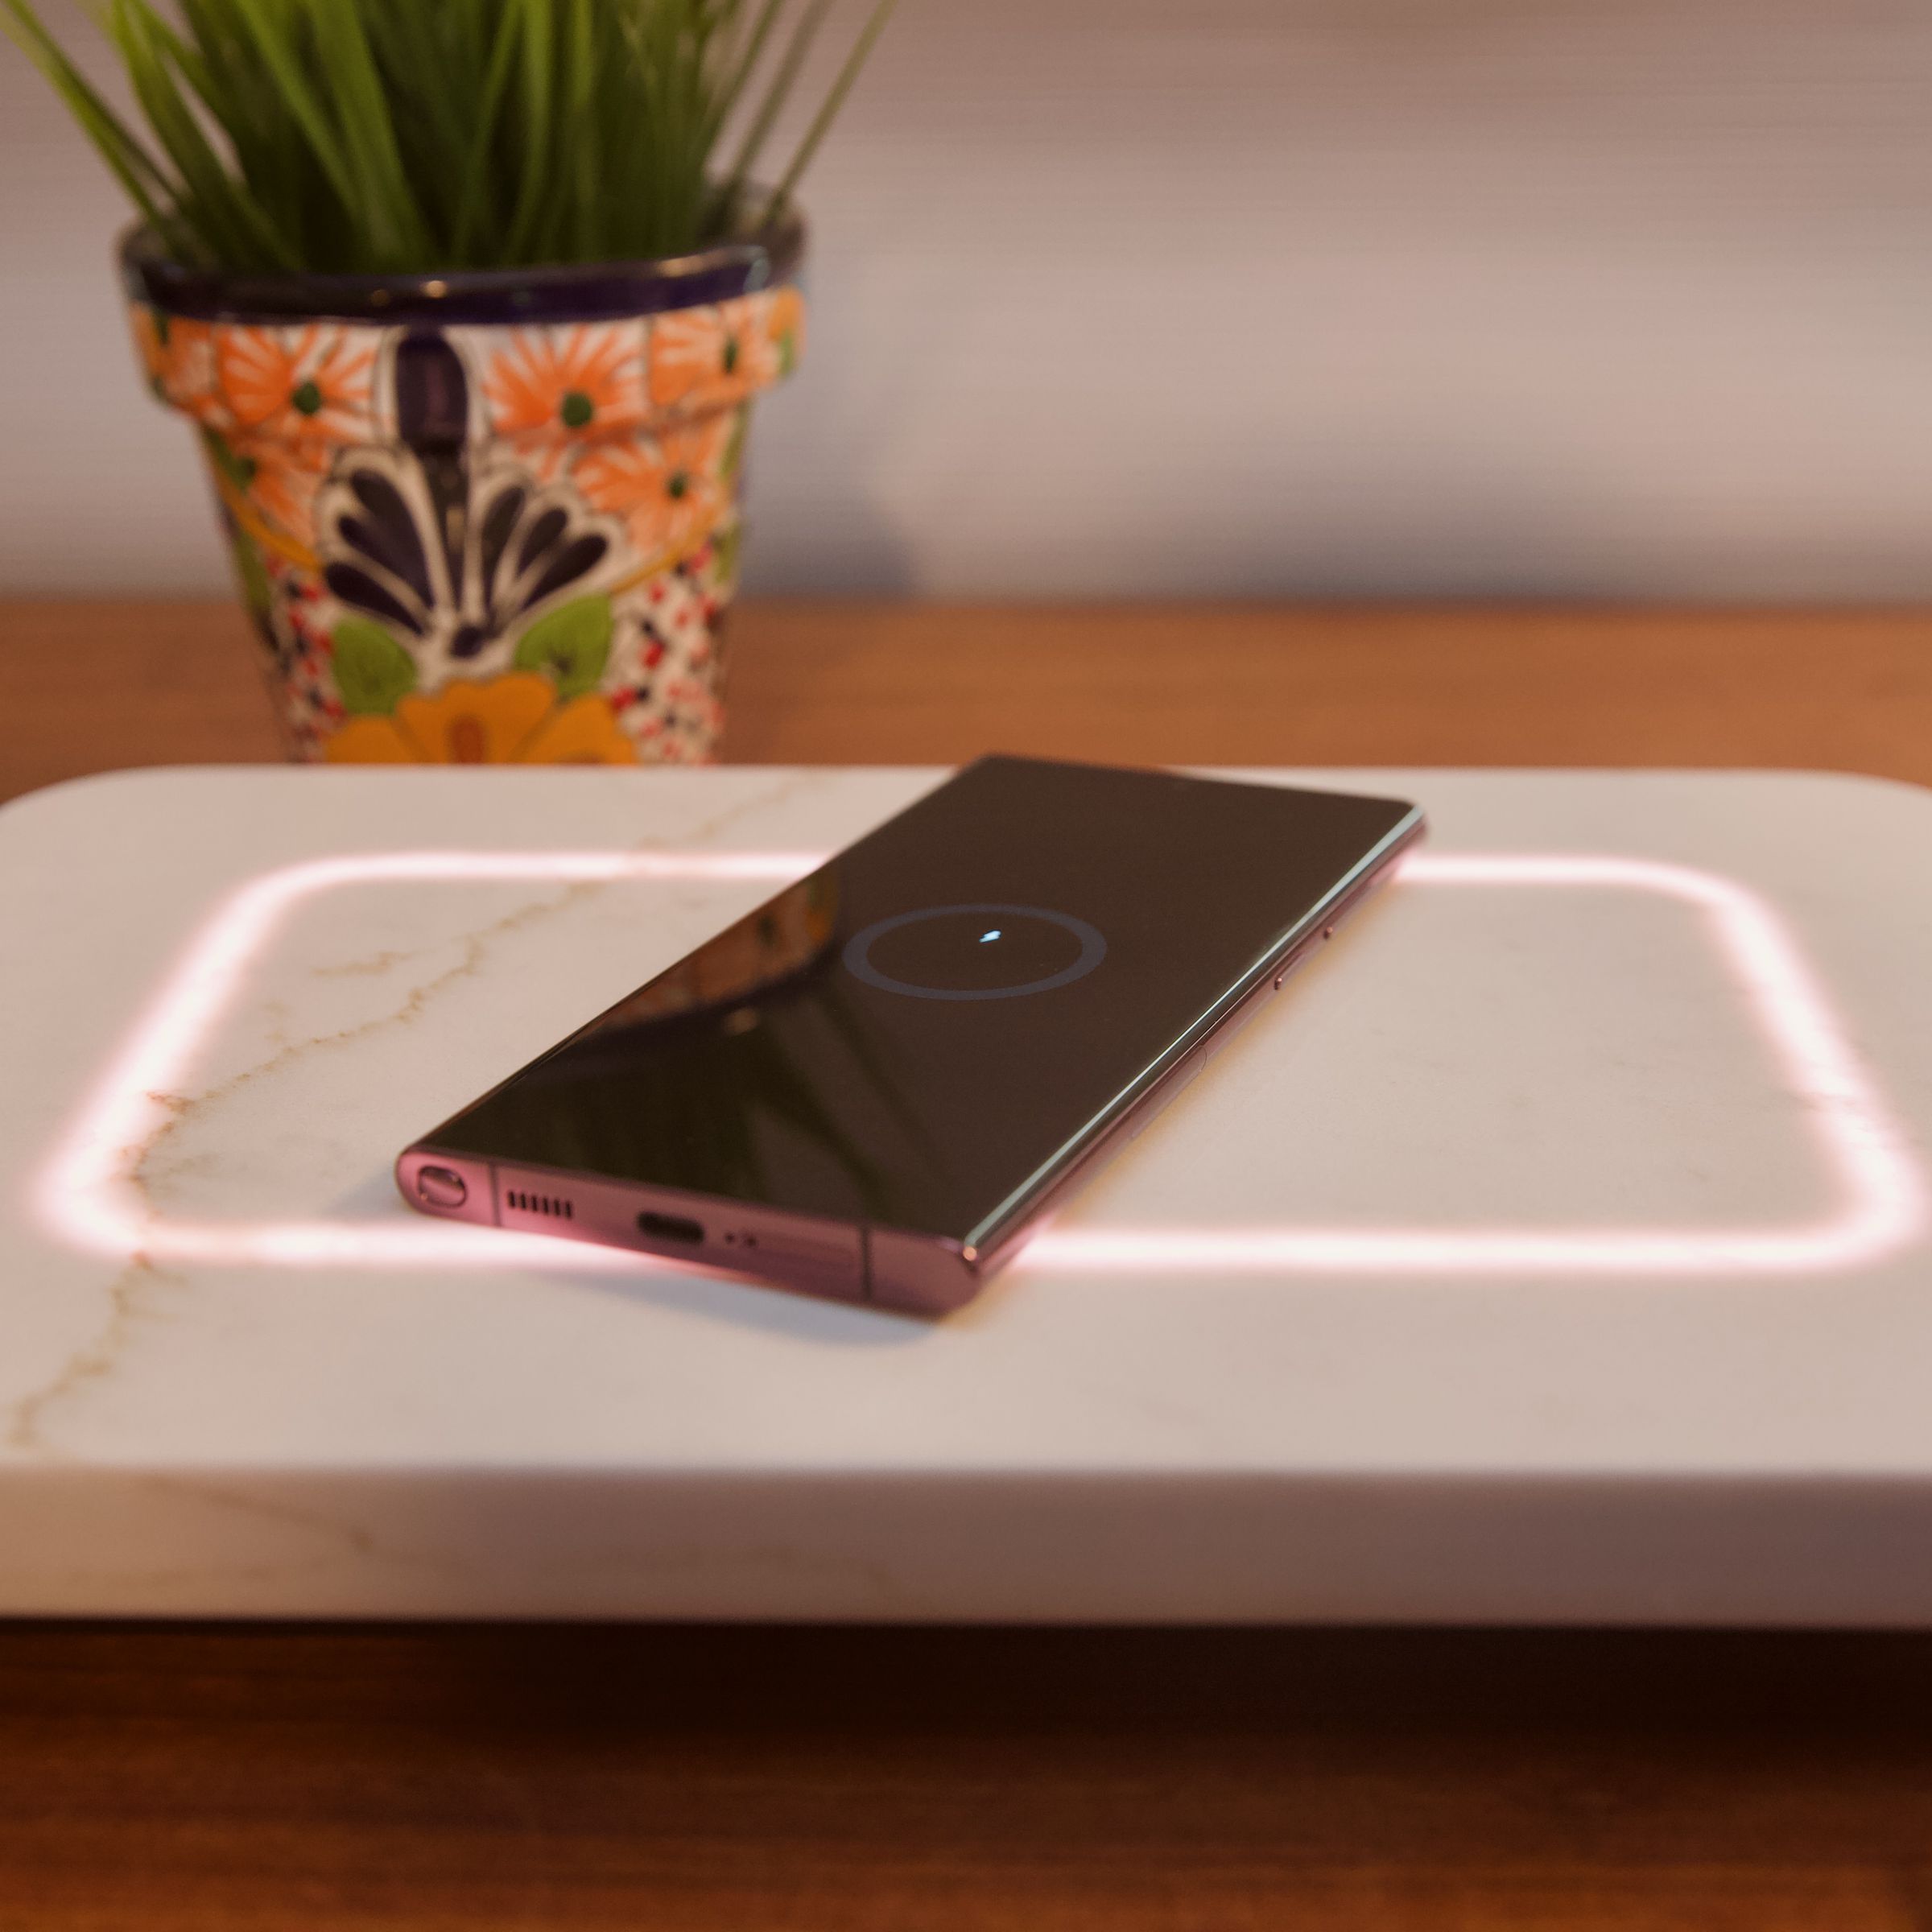 FreePower for Countertop is a Qi wireless charger built into your countertops. This is a demo unit I tried out to get a feel for the experience.